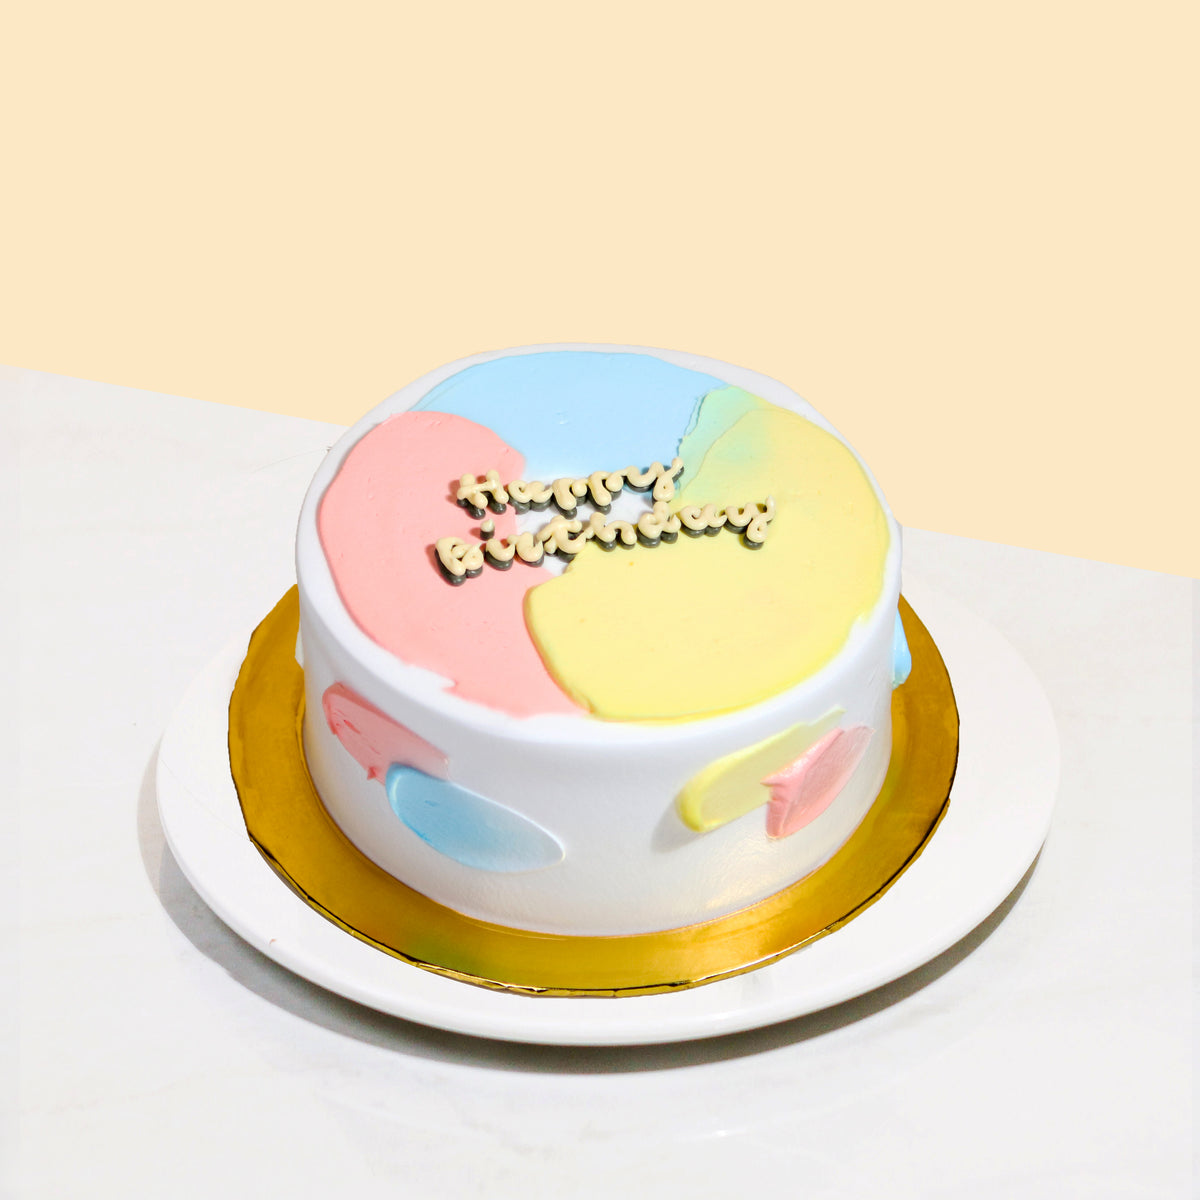 Competition - Win A Customised Cake With Pastel Cakes - Connector Dubai